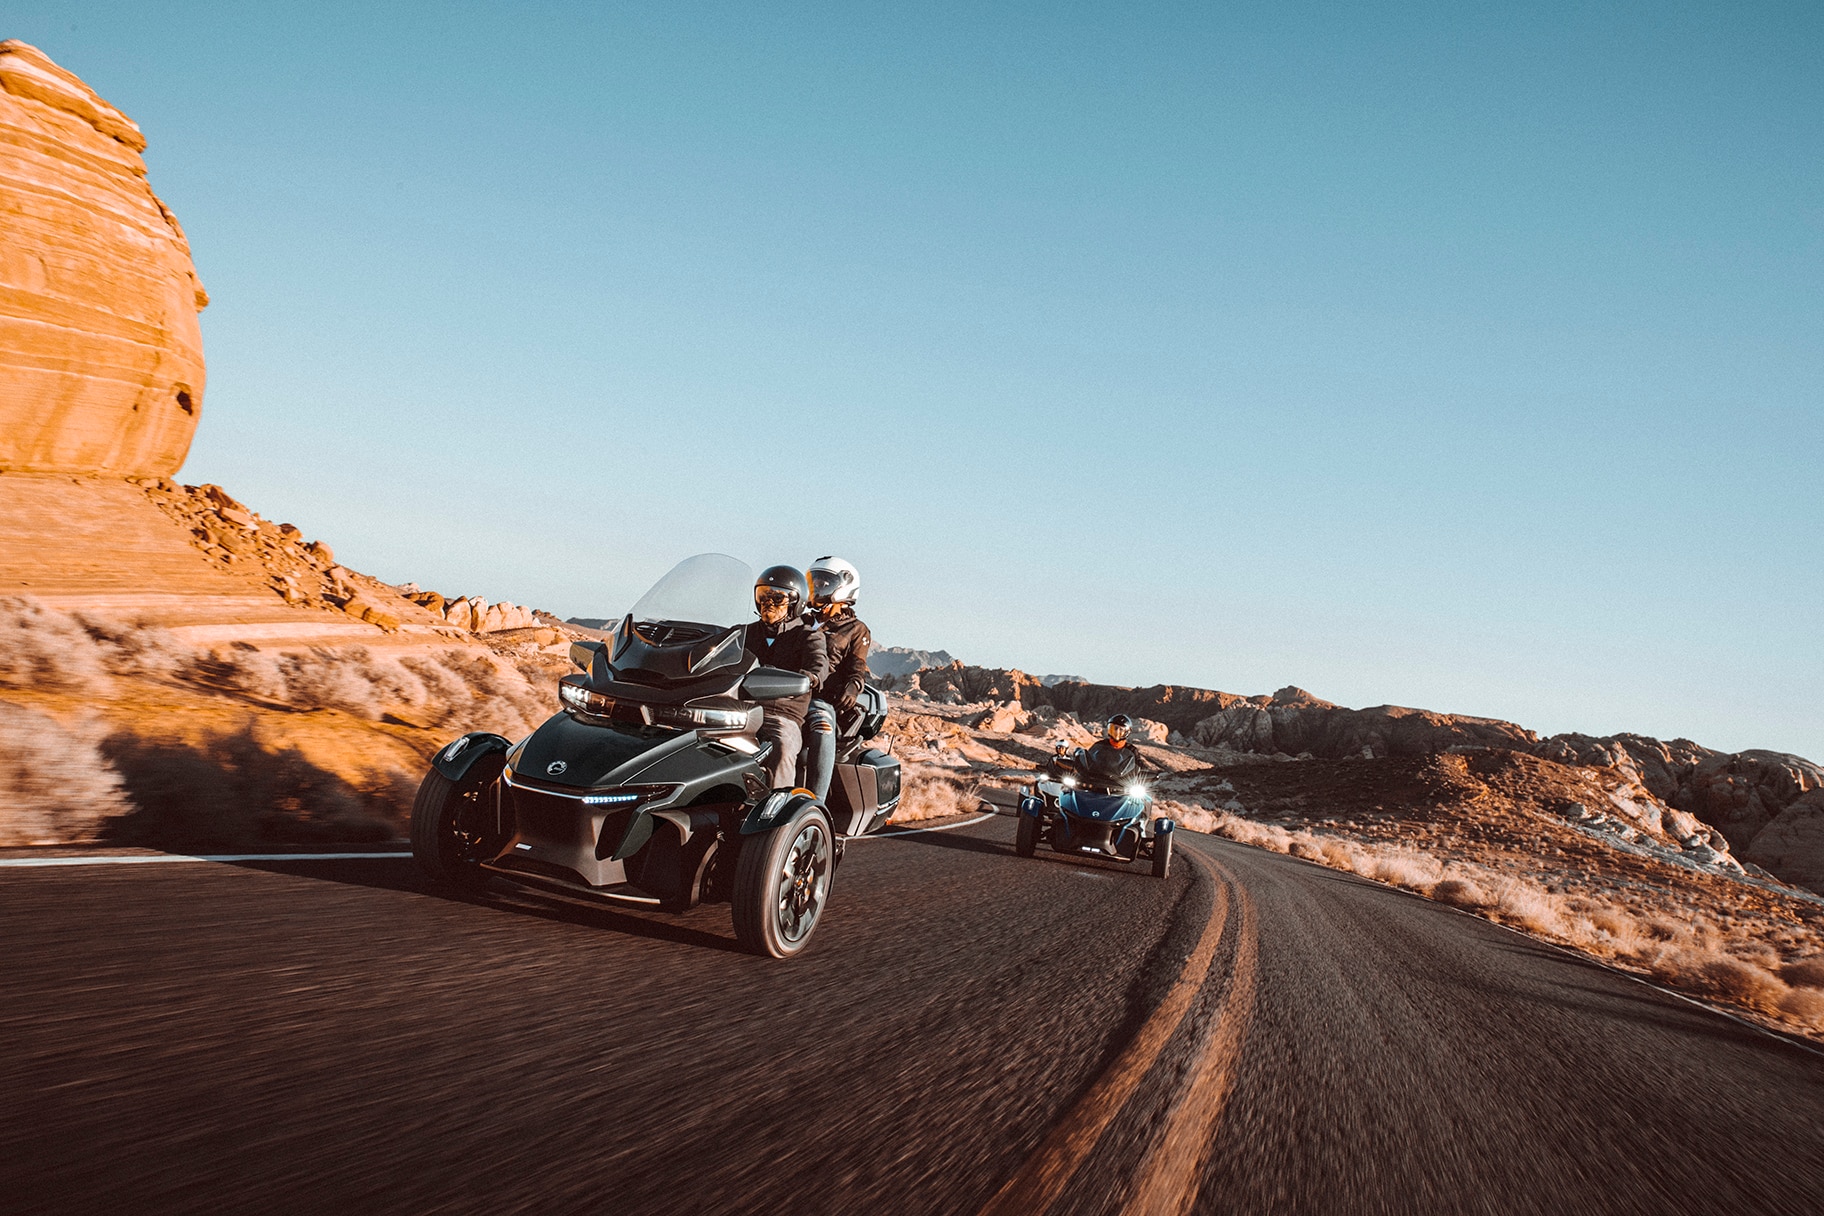 People on Can-Am Spyders on the road